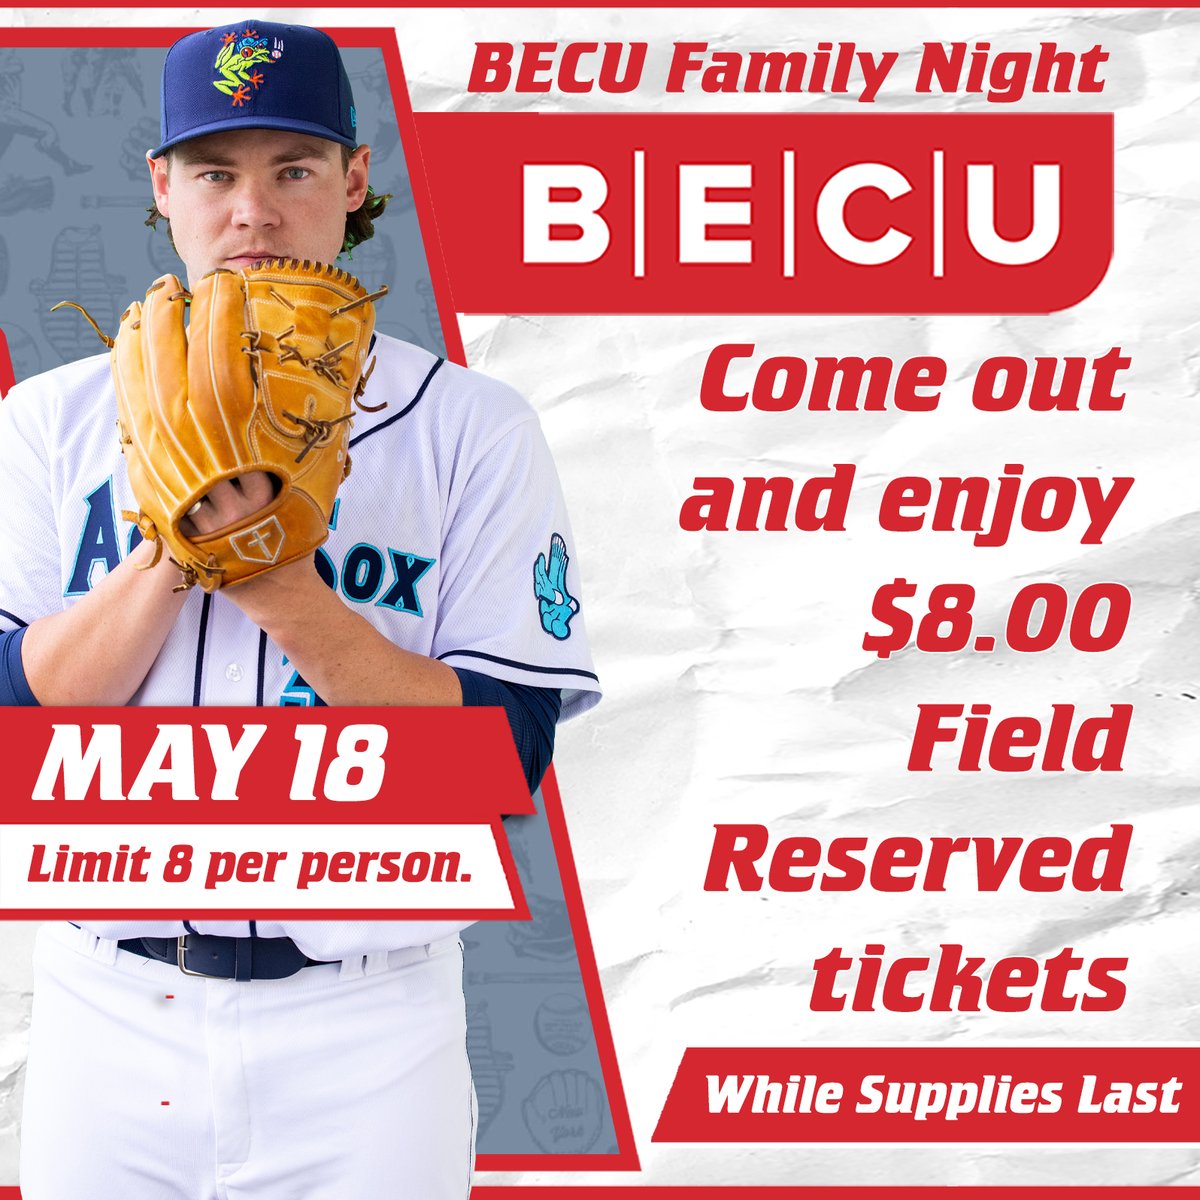 Saturday is another great @BECU Family Night at Funko Field. Field Reserved tickets are just $8.00 while supplies last.